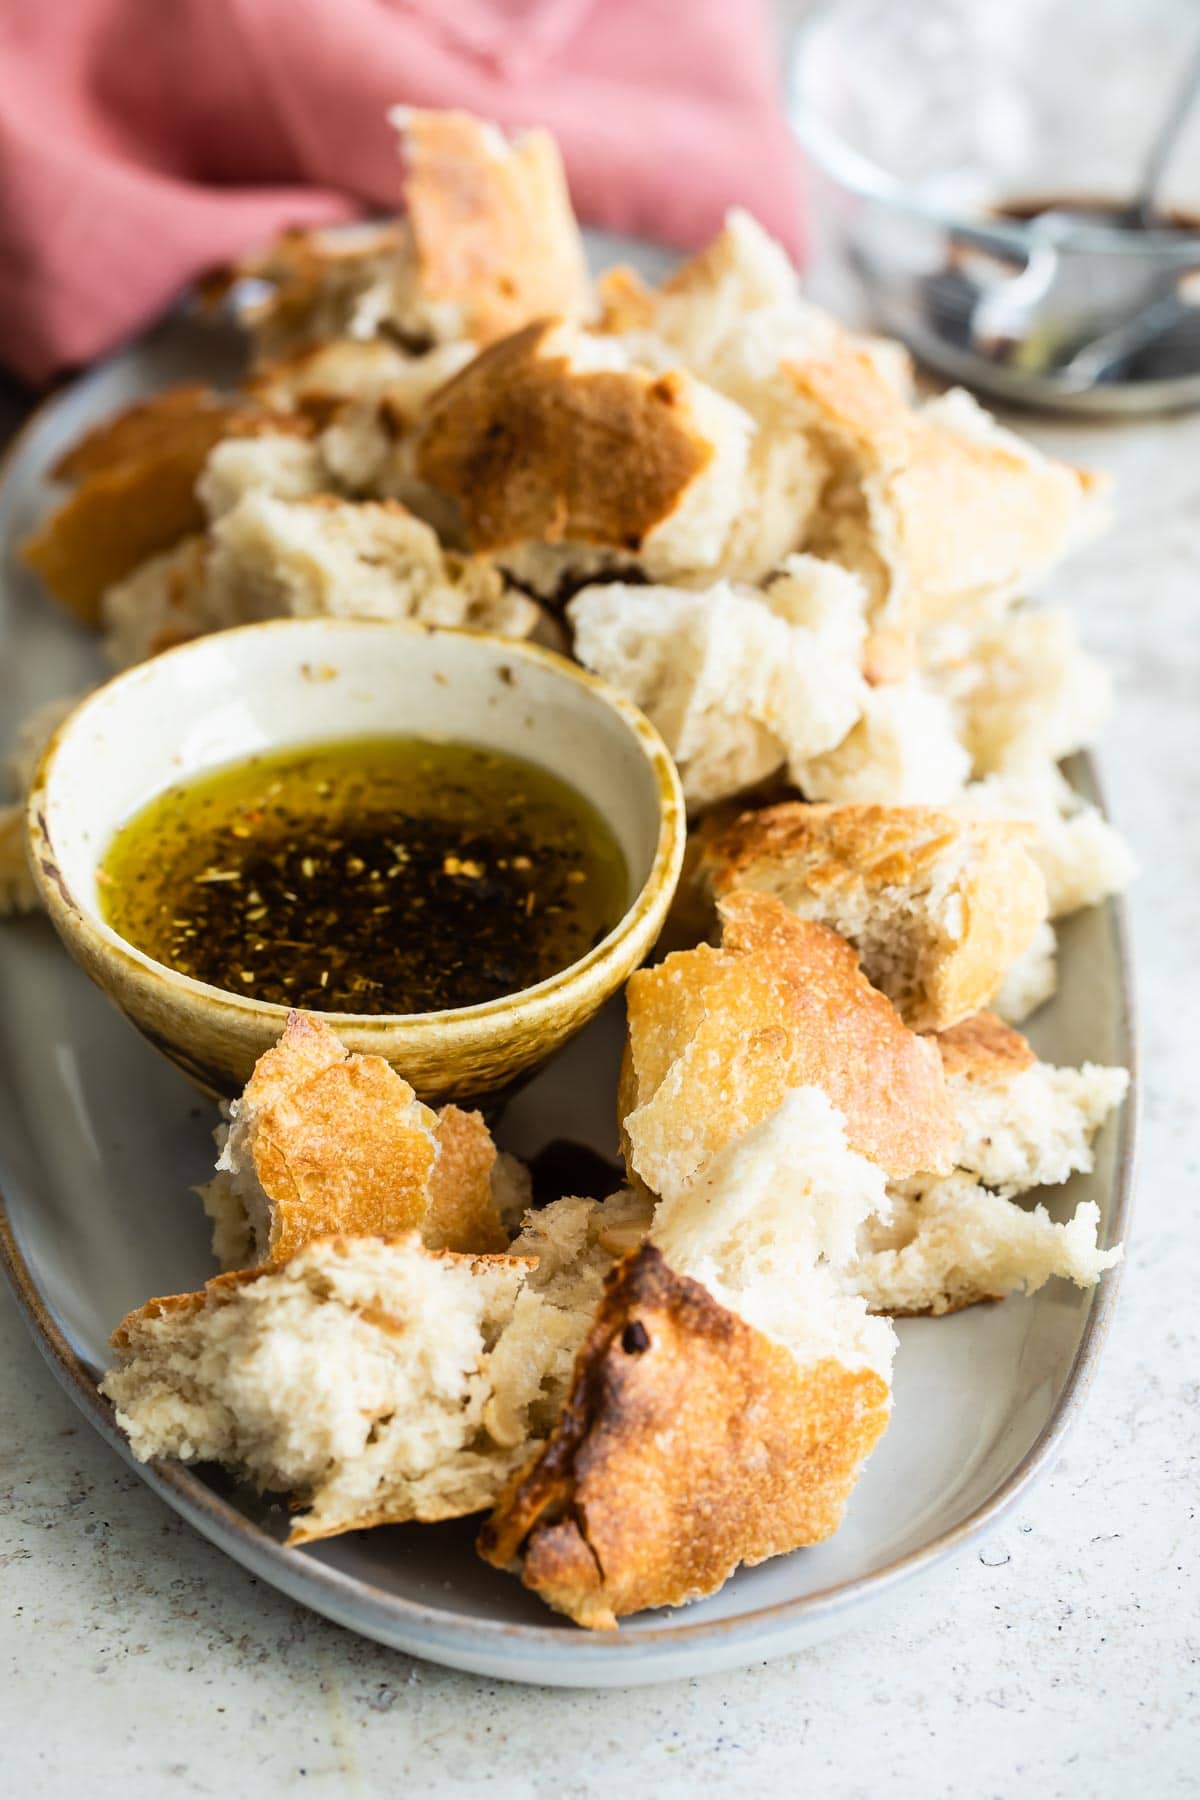 Ripped pieces of bread on a platter with dipping oil in a bowl.